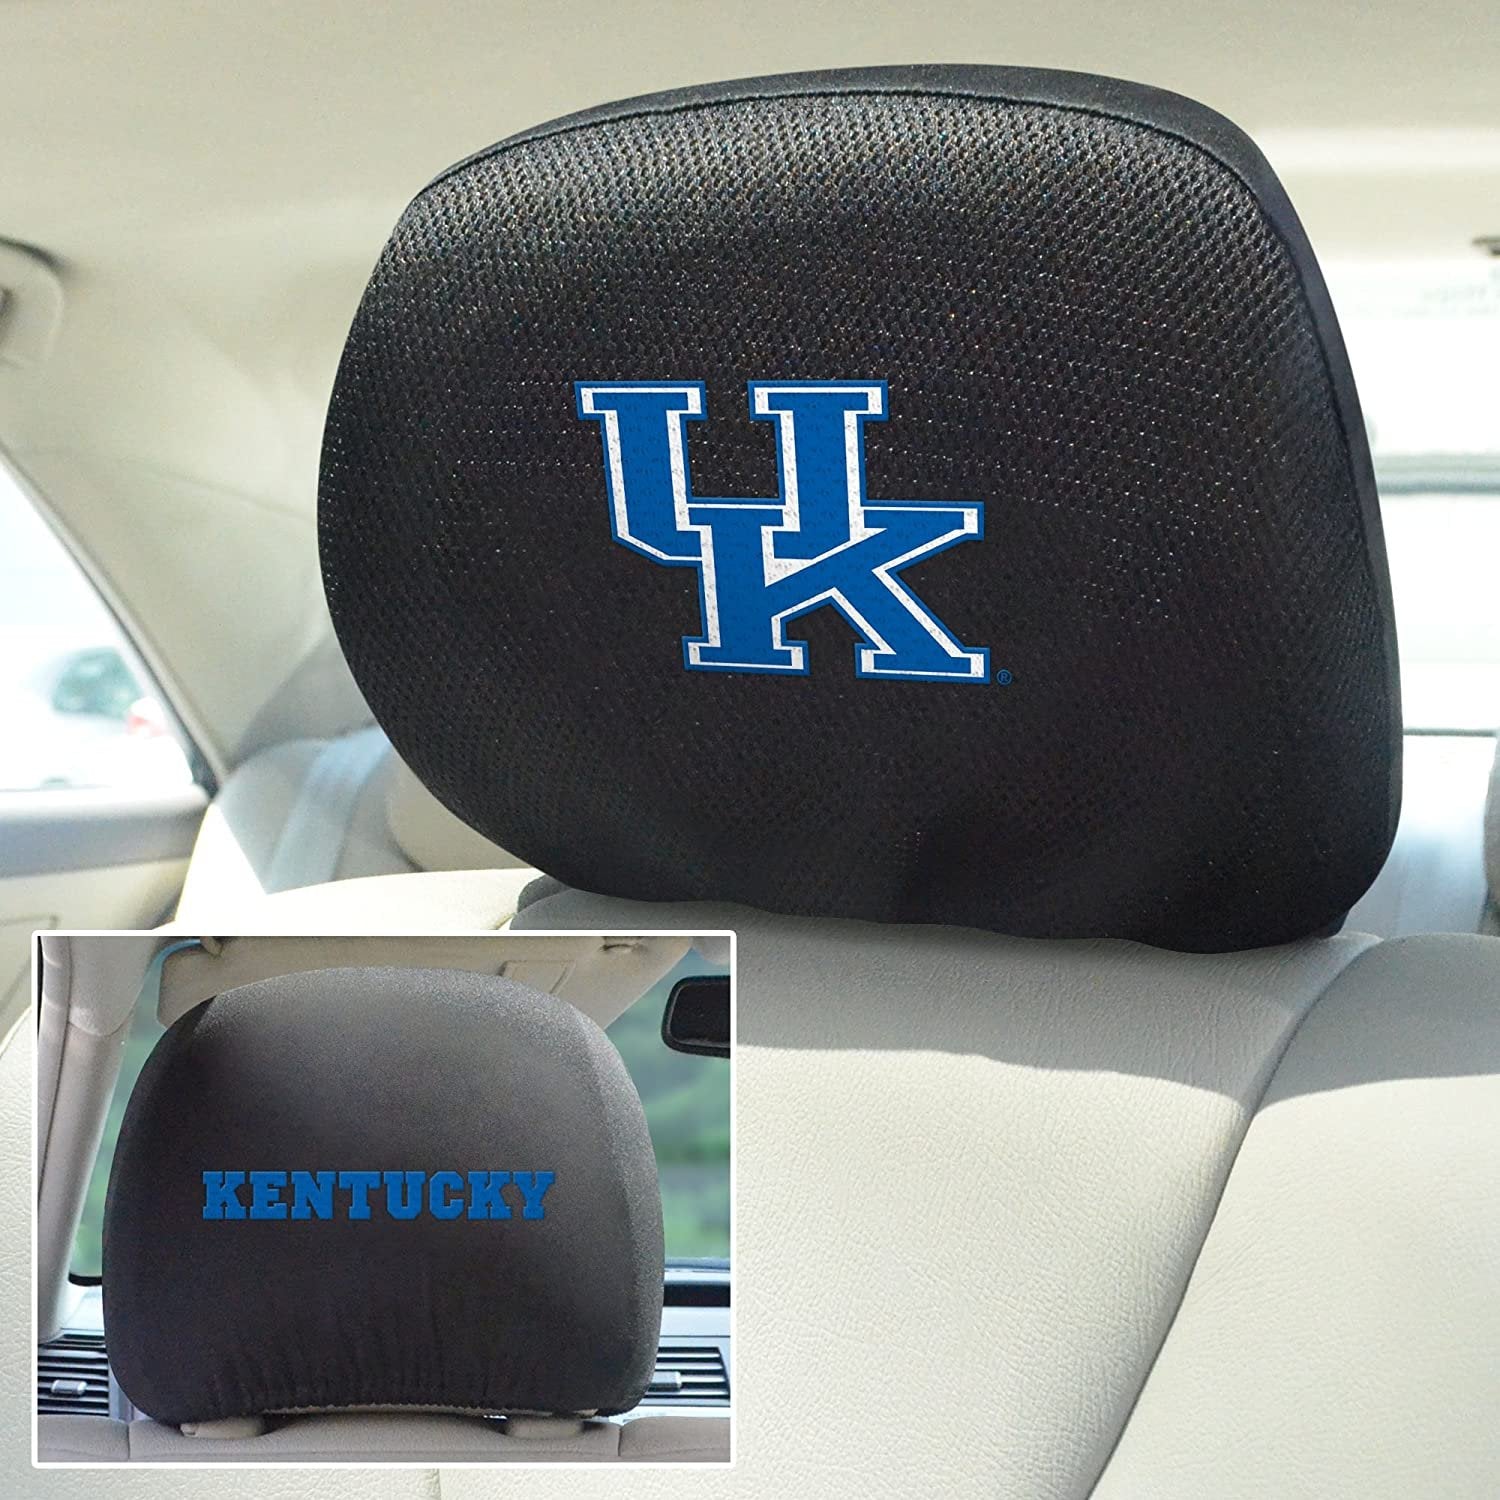 University of Kentucky Wildcats Pair of Premium Auto Head Rest Covers, Embroidered, Black Elastic, 14x10 Inch